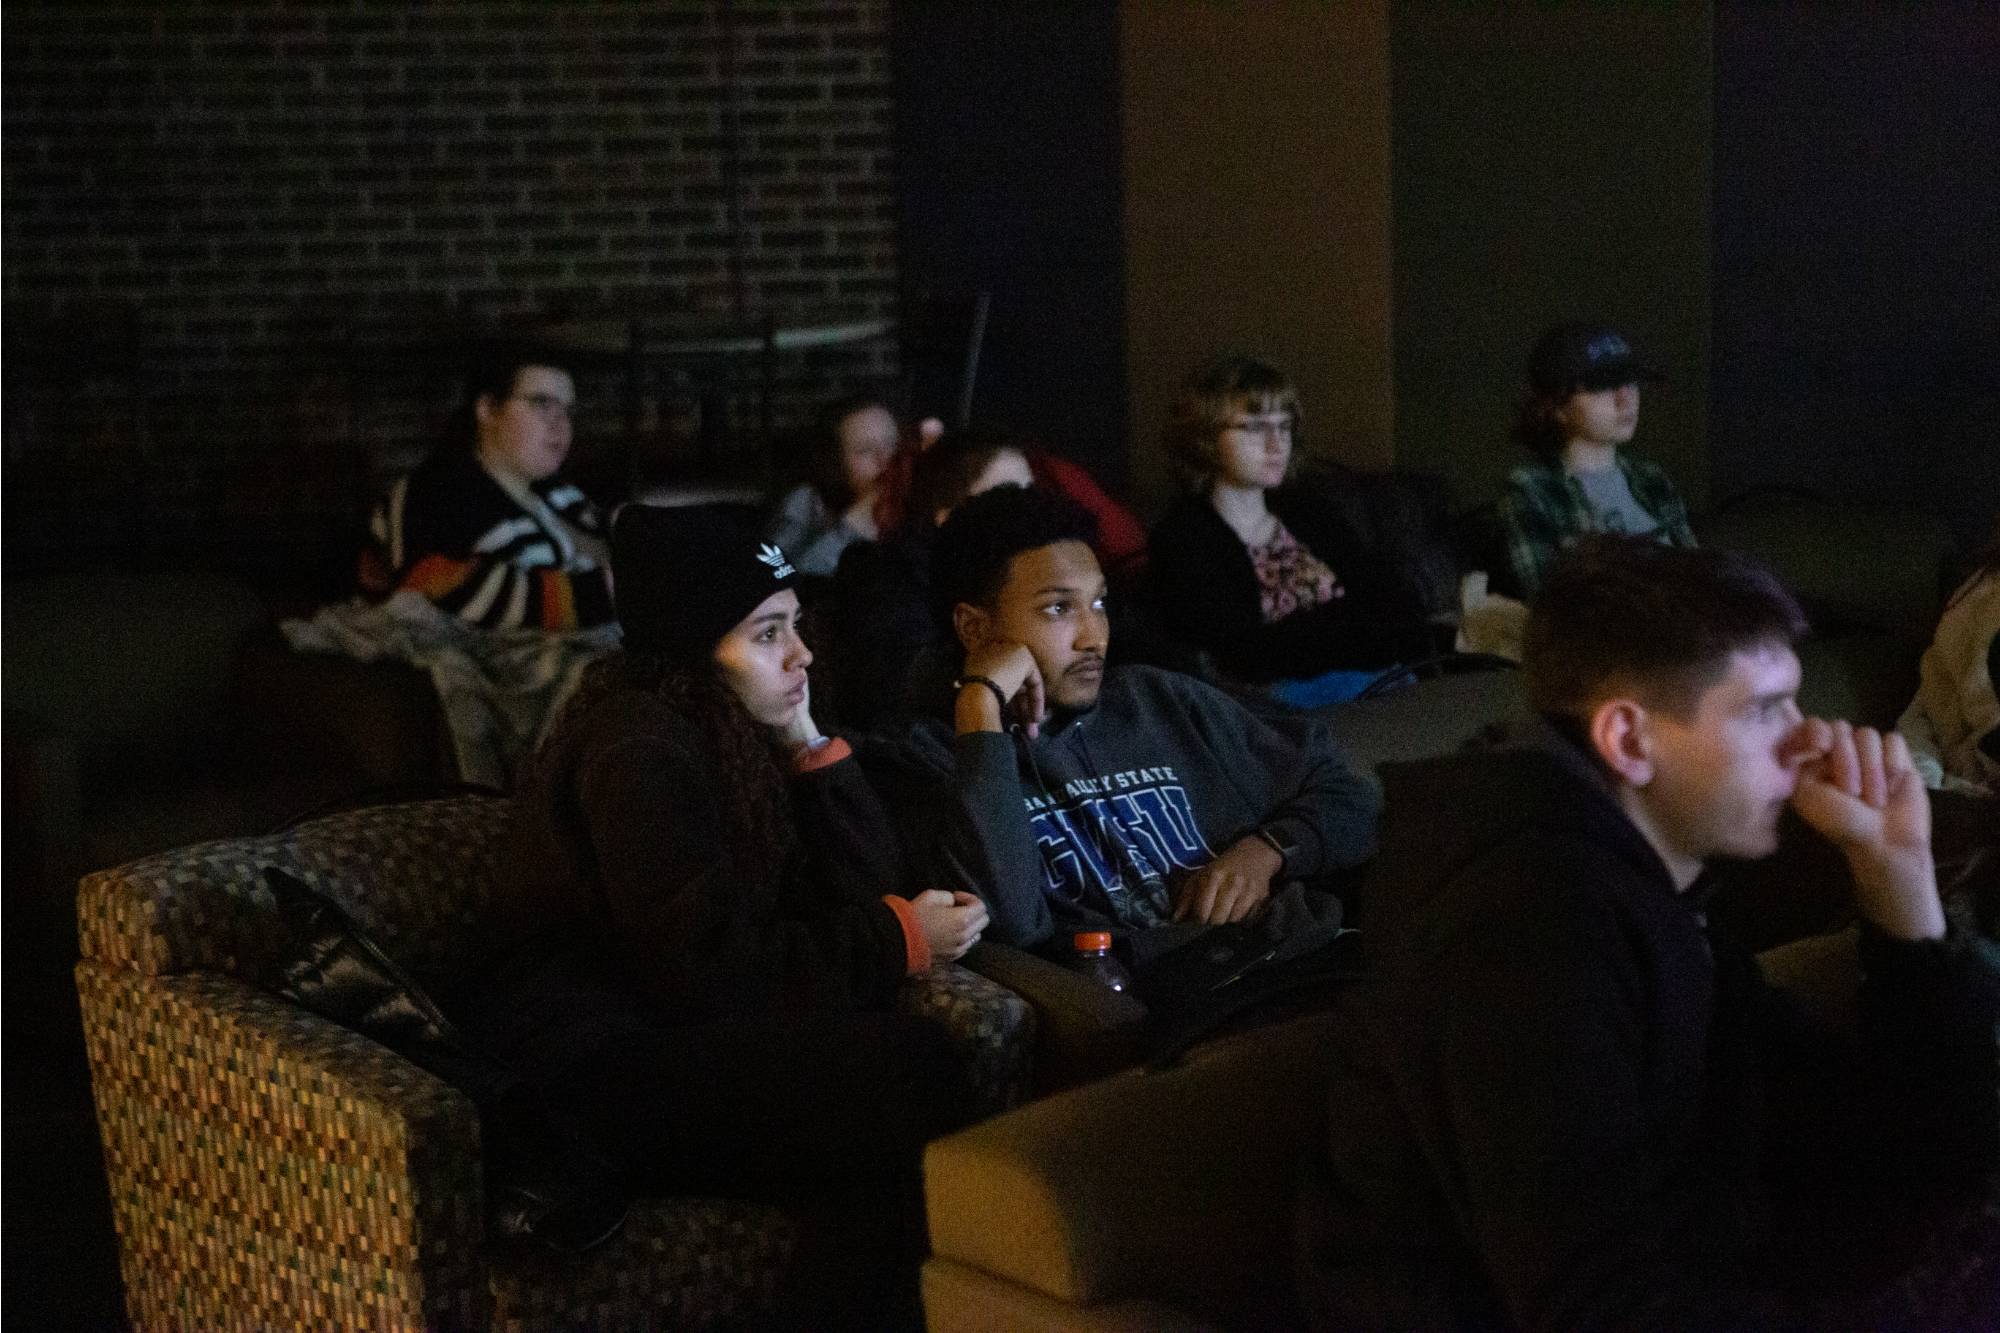 Students watching a movie in the Big Screen Theater.